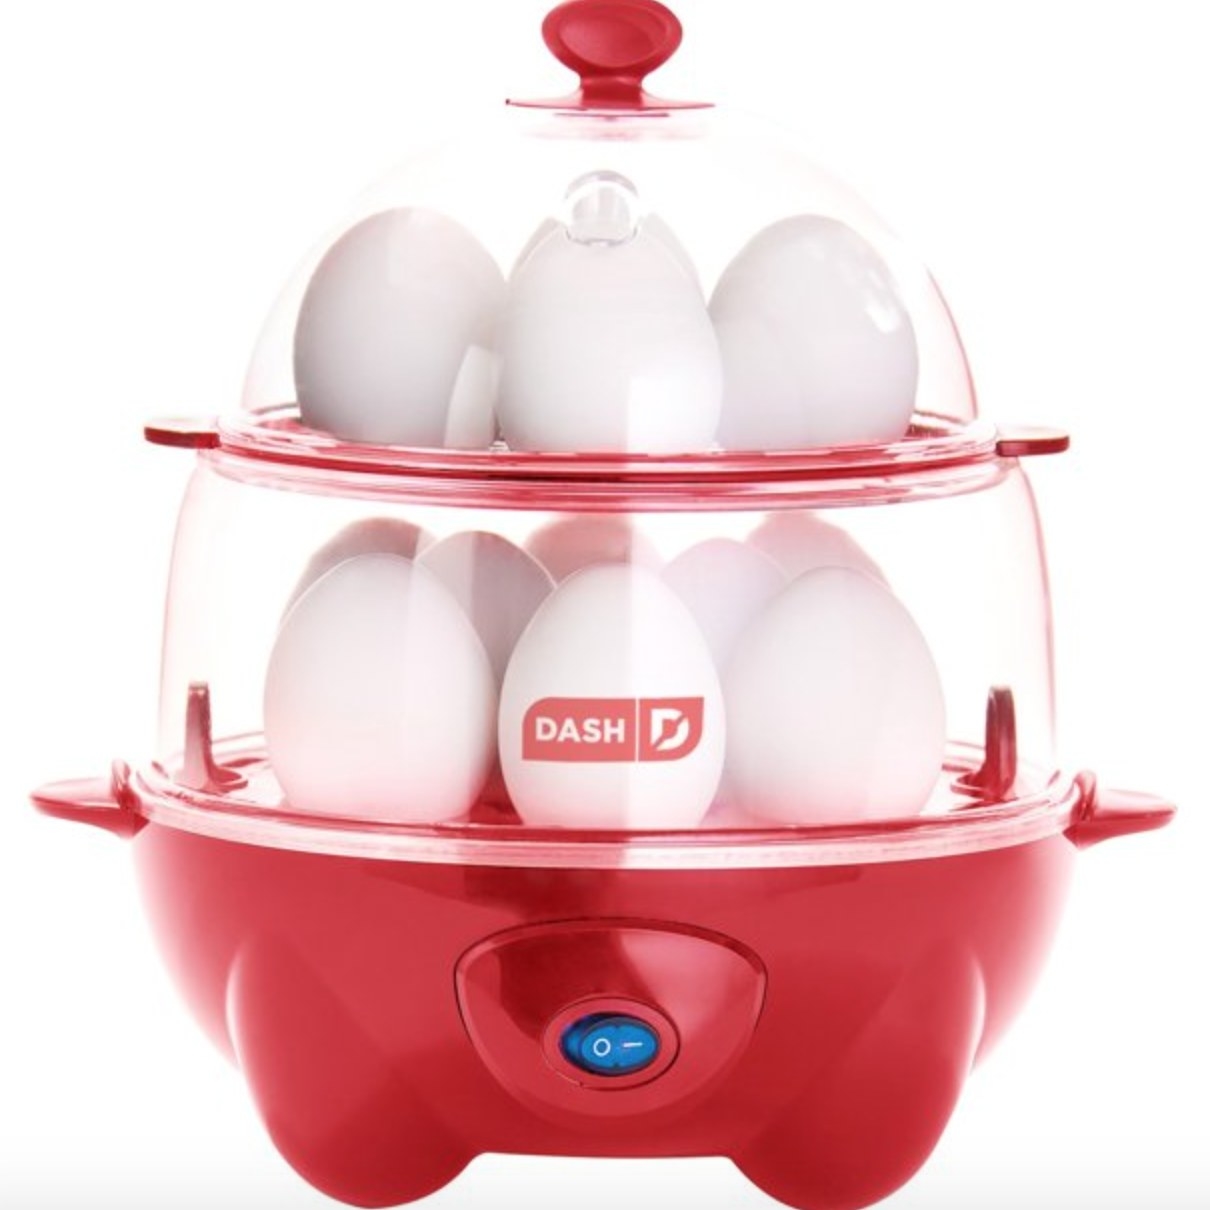 the red egg cooker